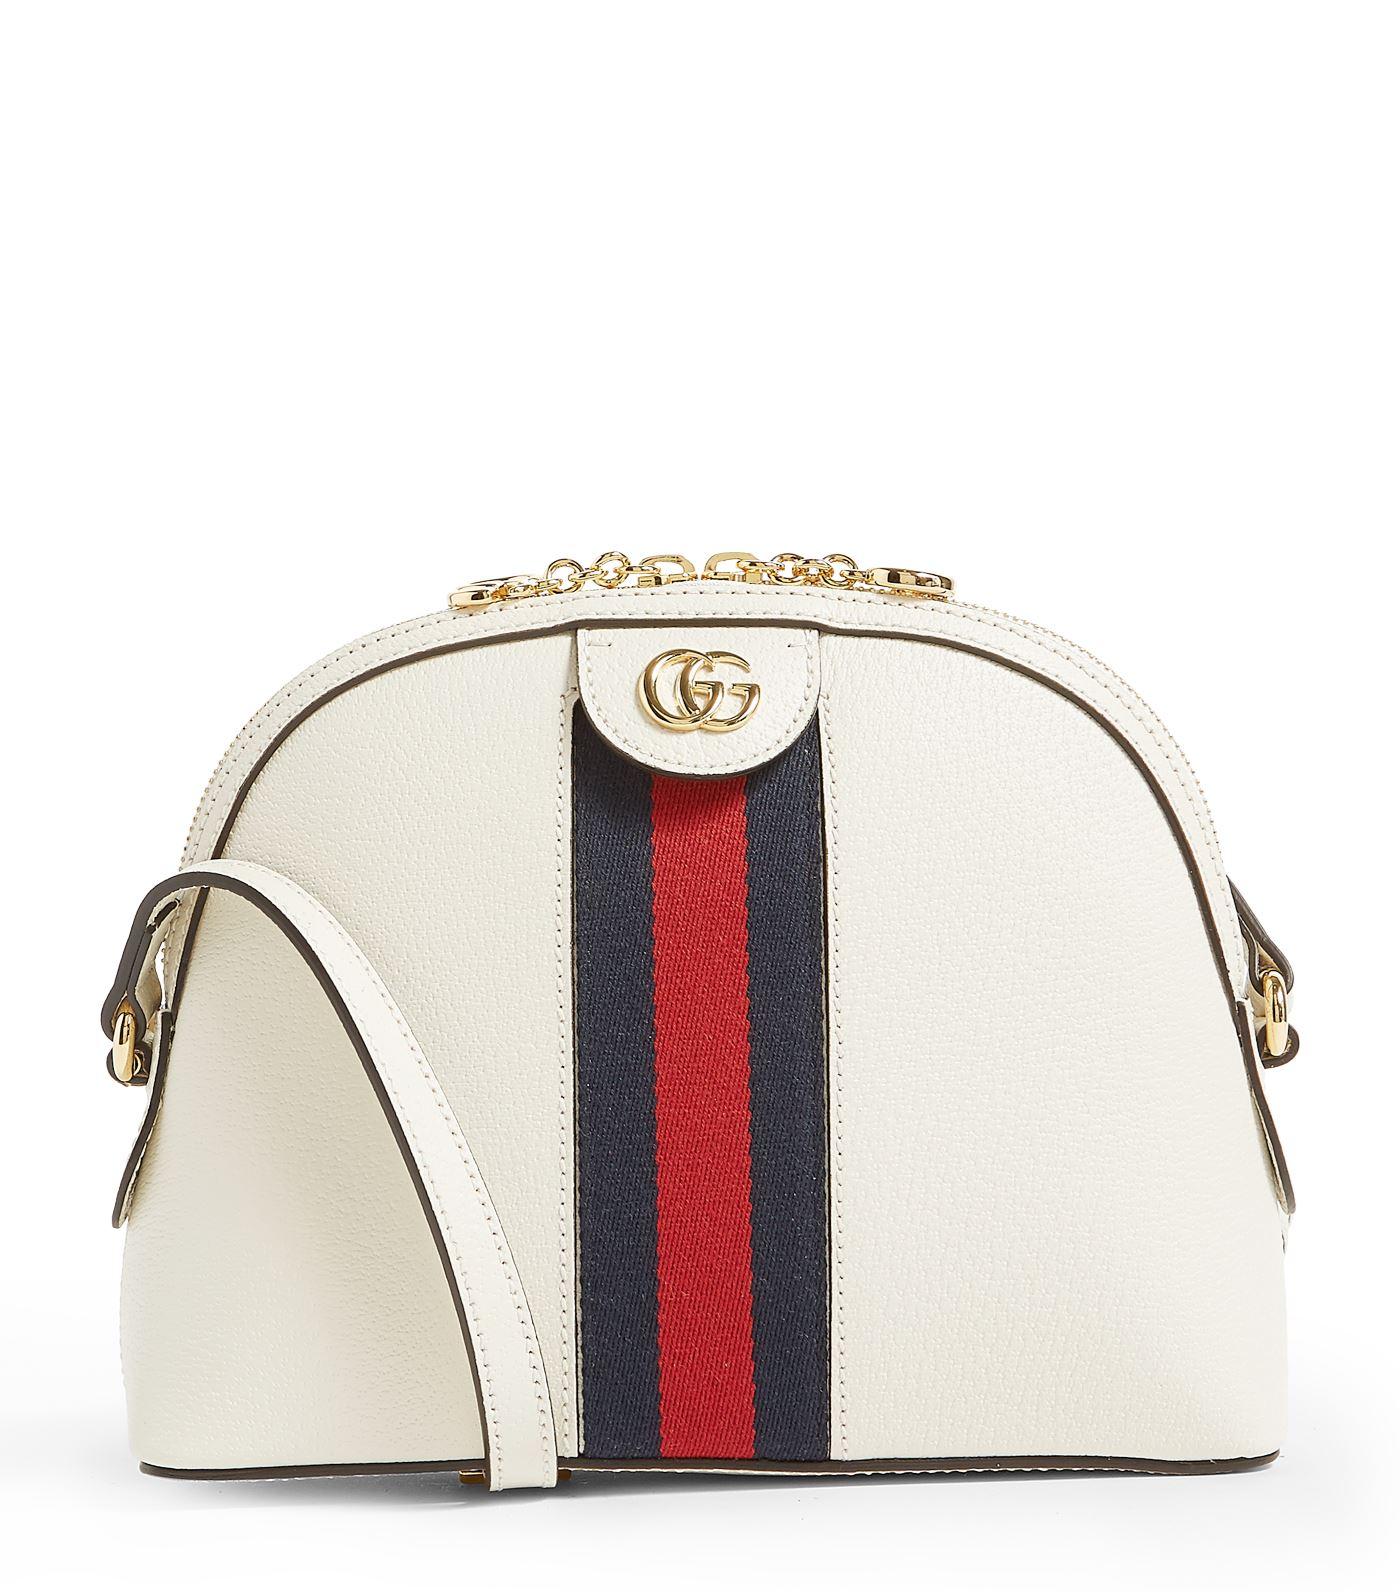 Gucci Ophidia small messenger bag